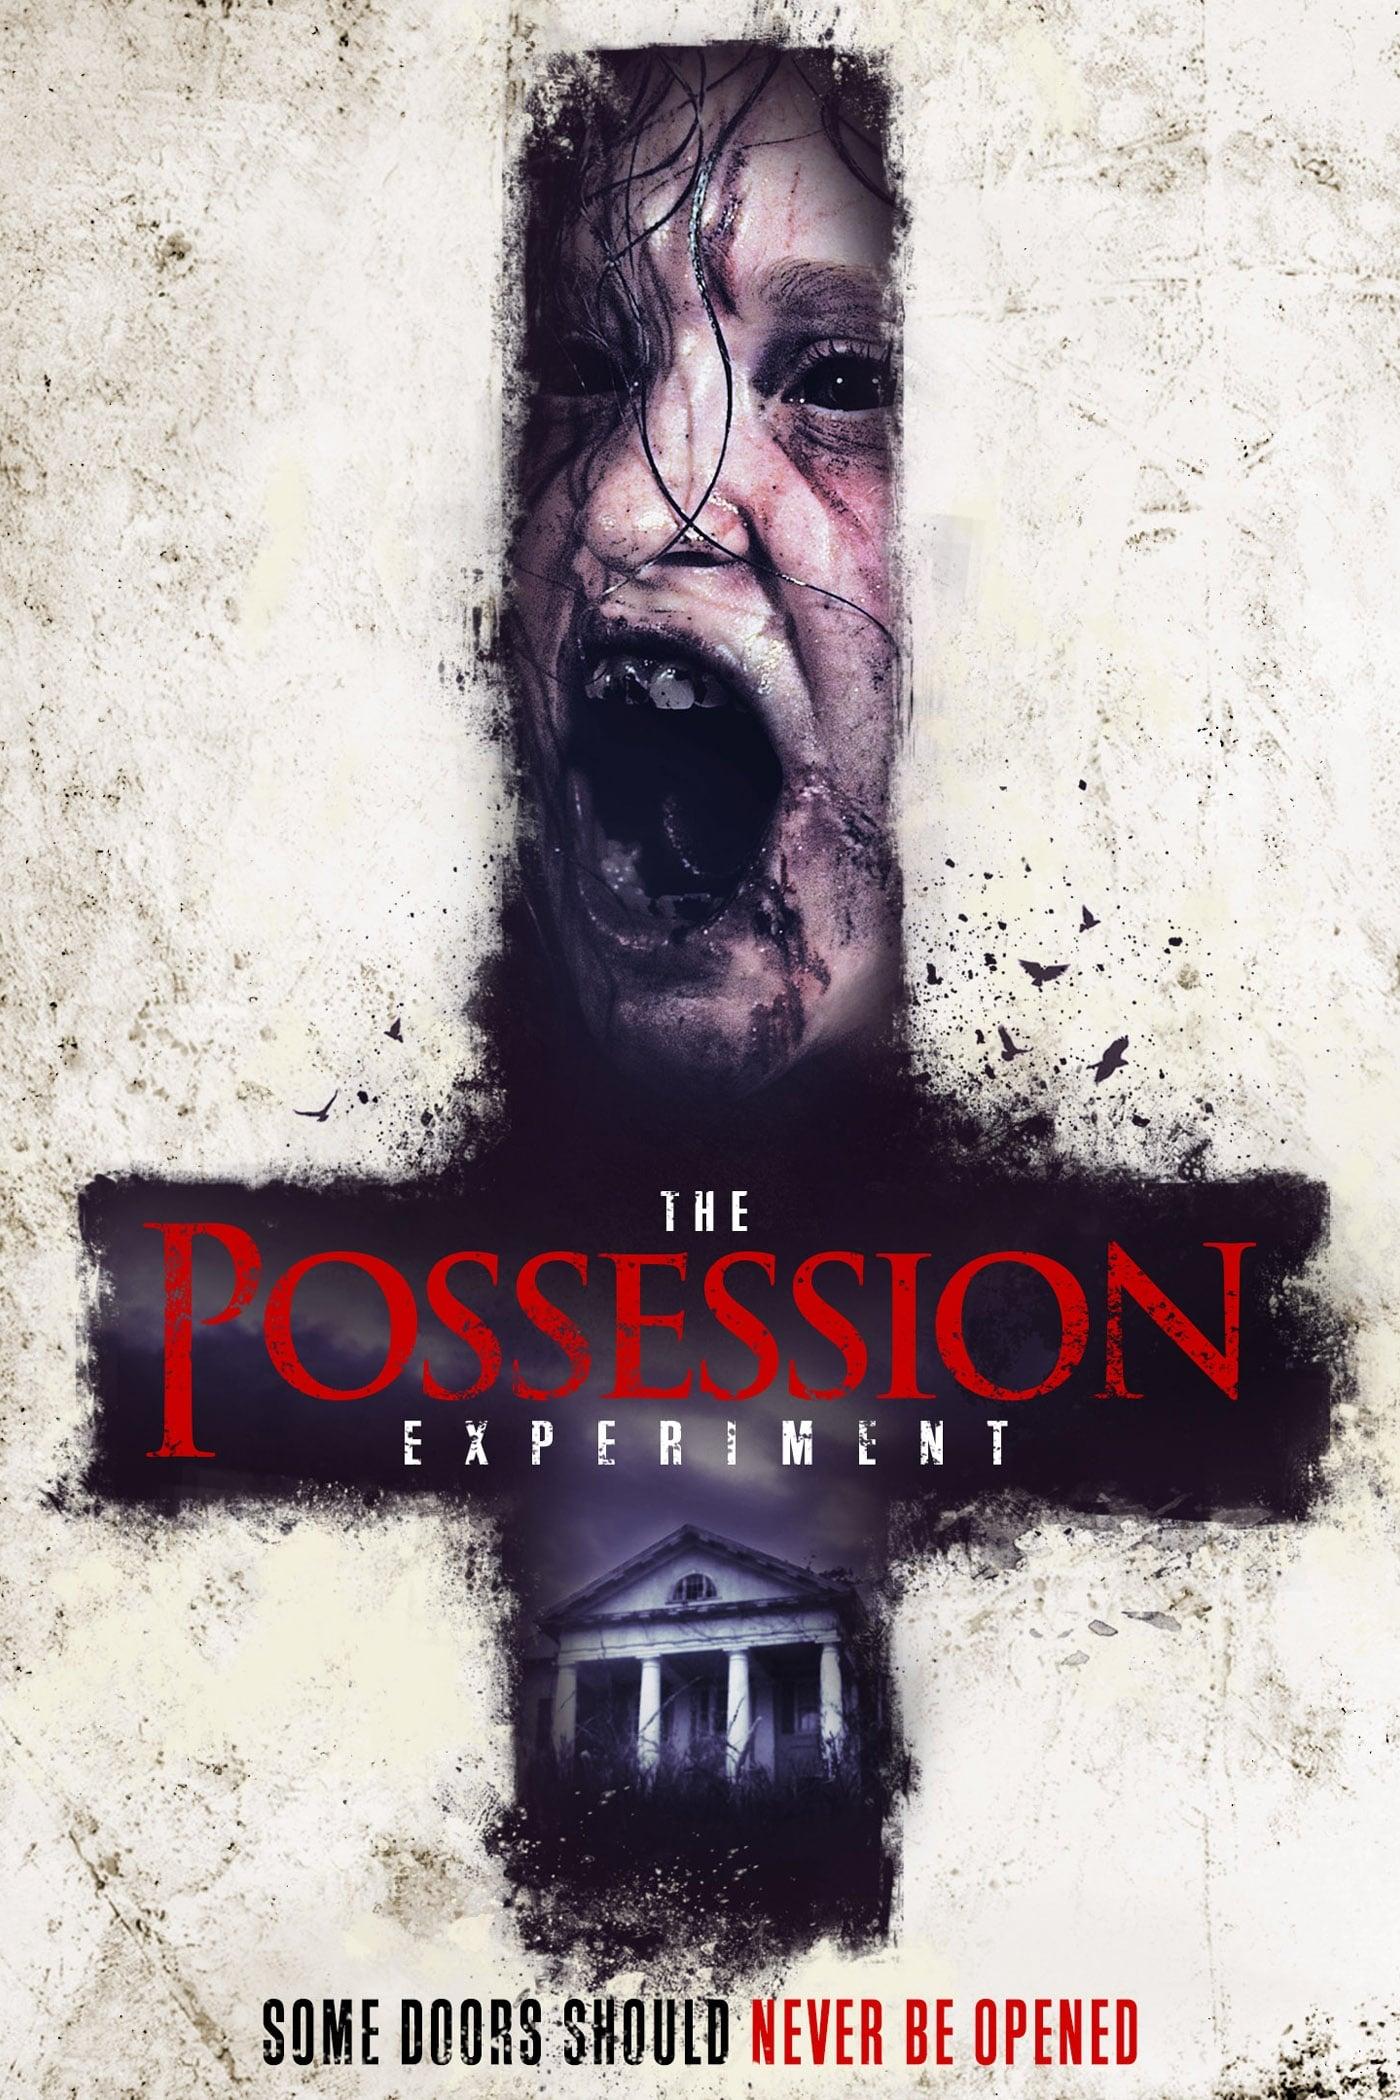 The Possession Experiment poster